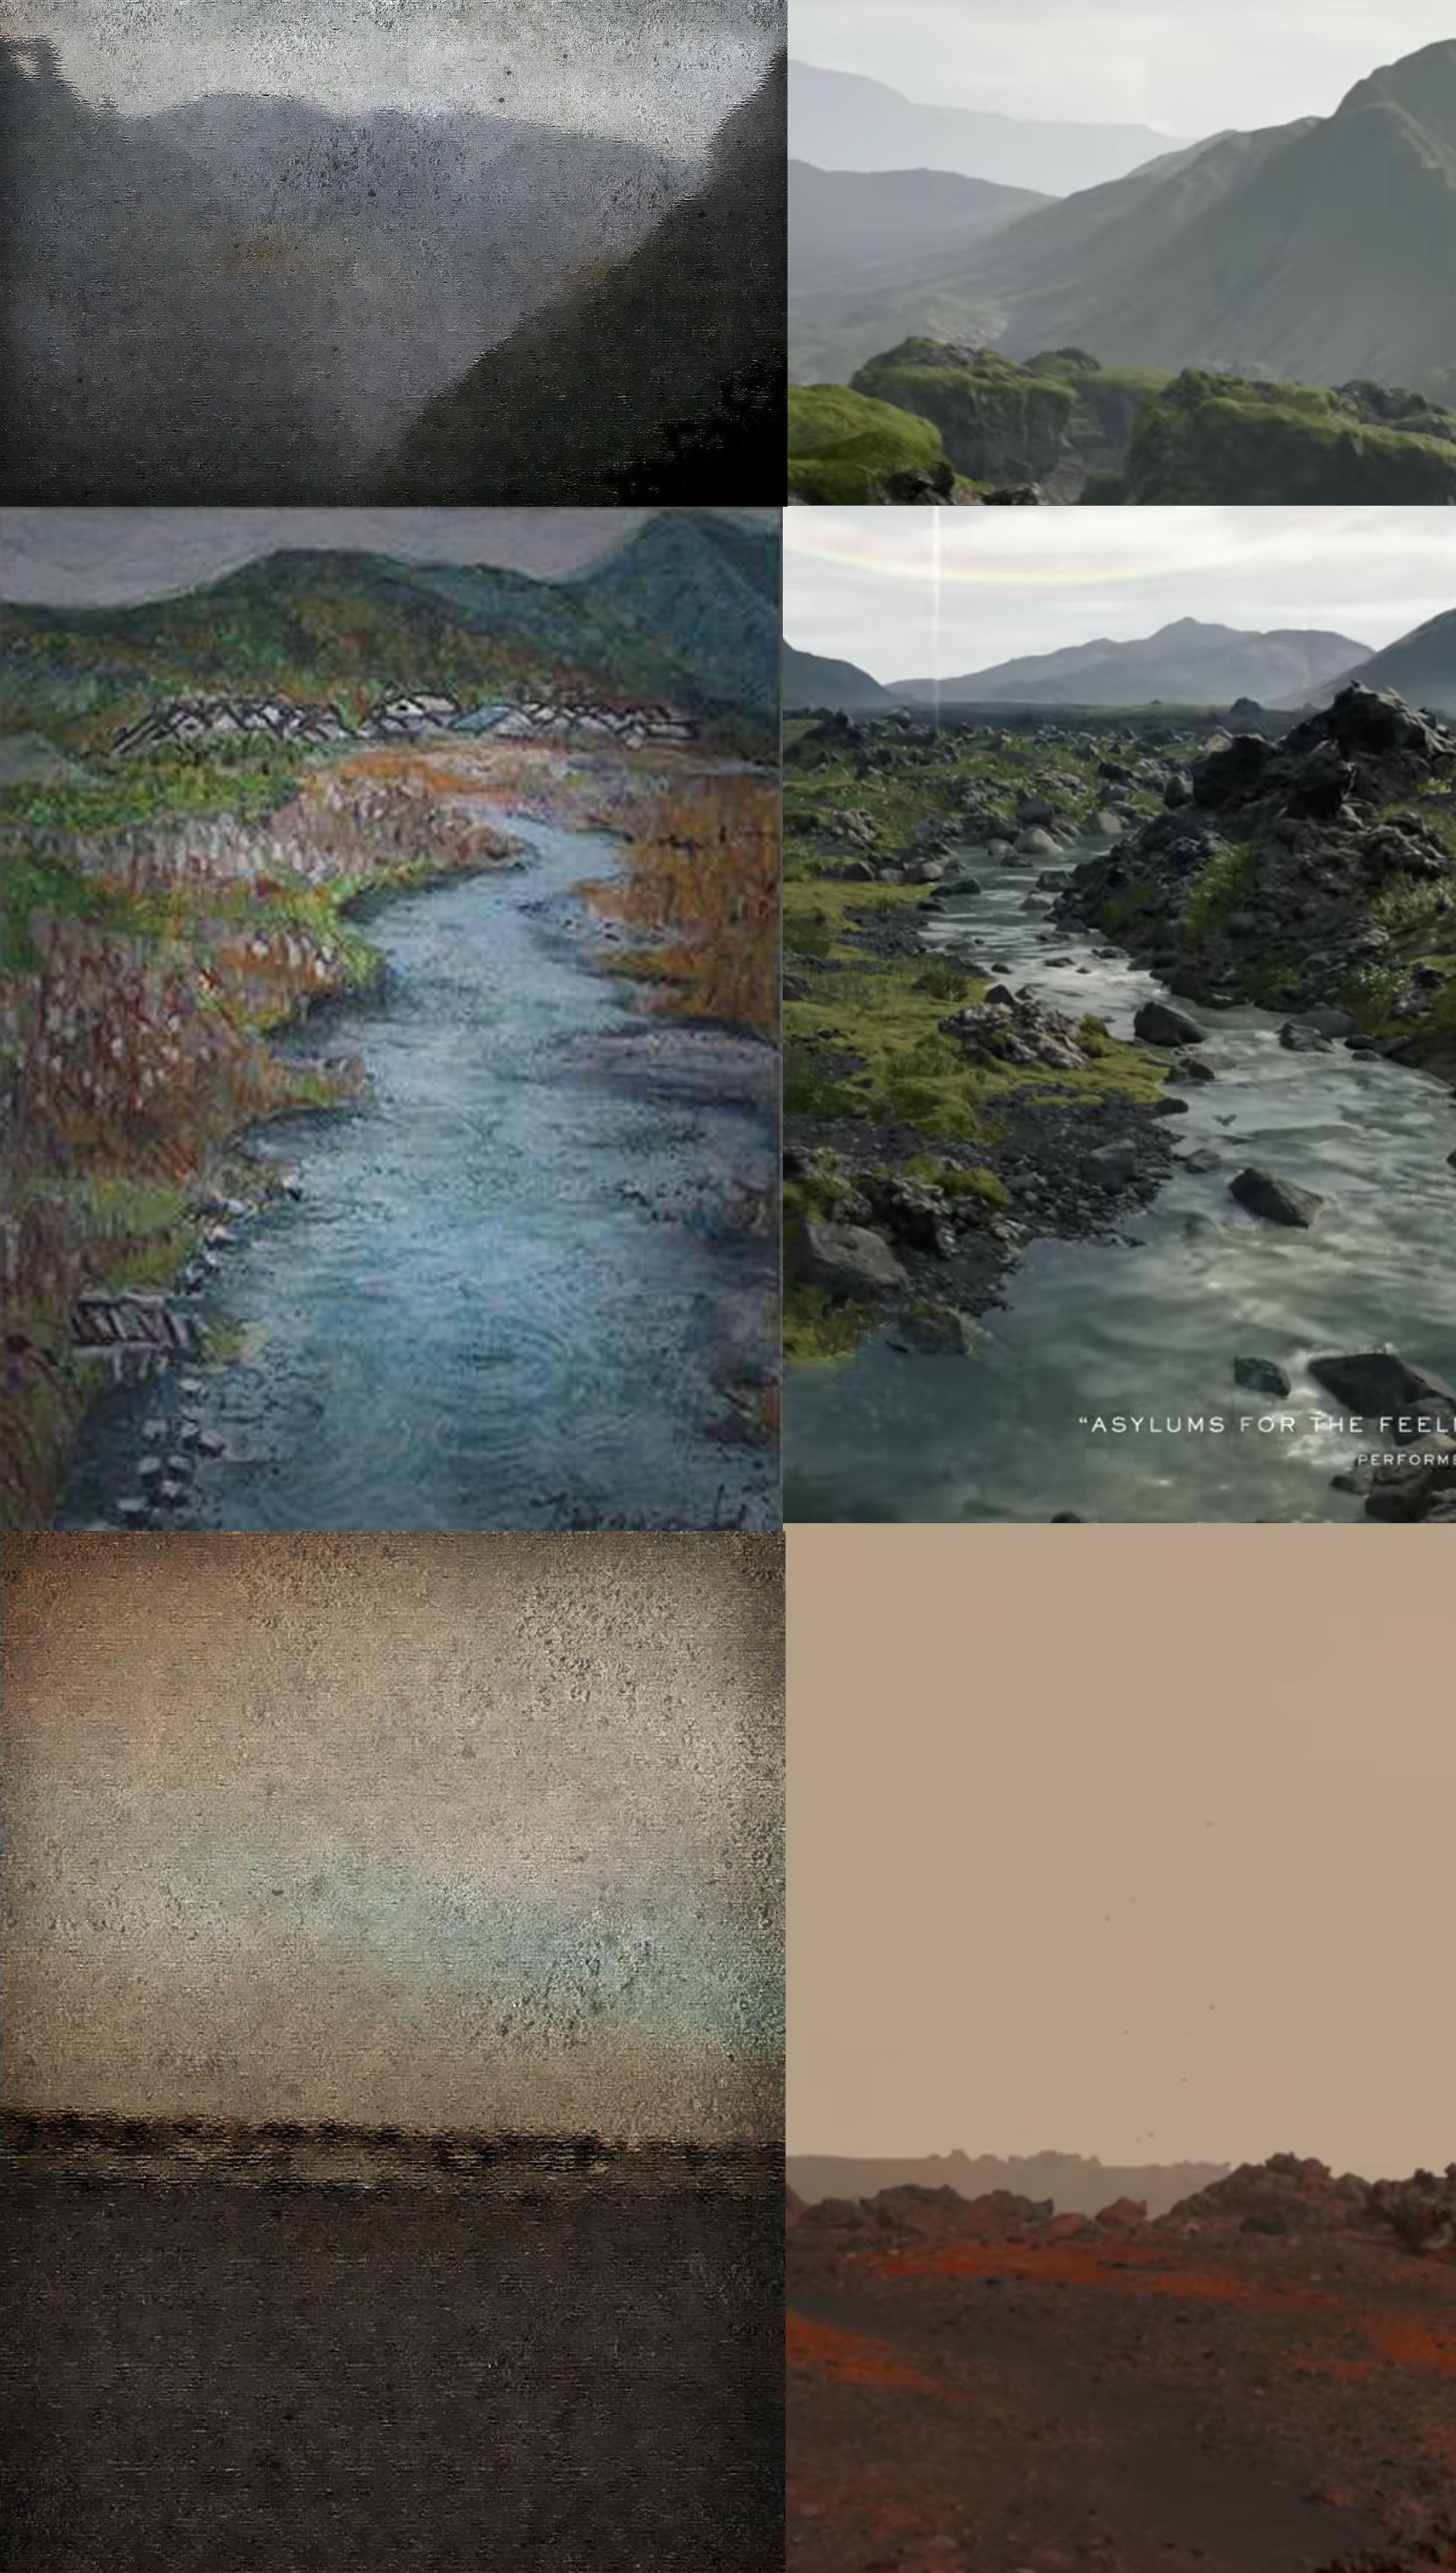 PT paintings are on the left, Death Stranding landscapes are on the right.